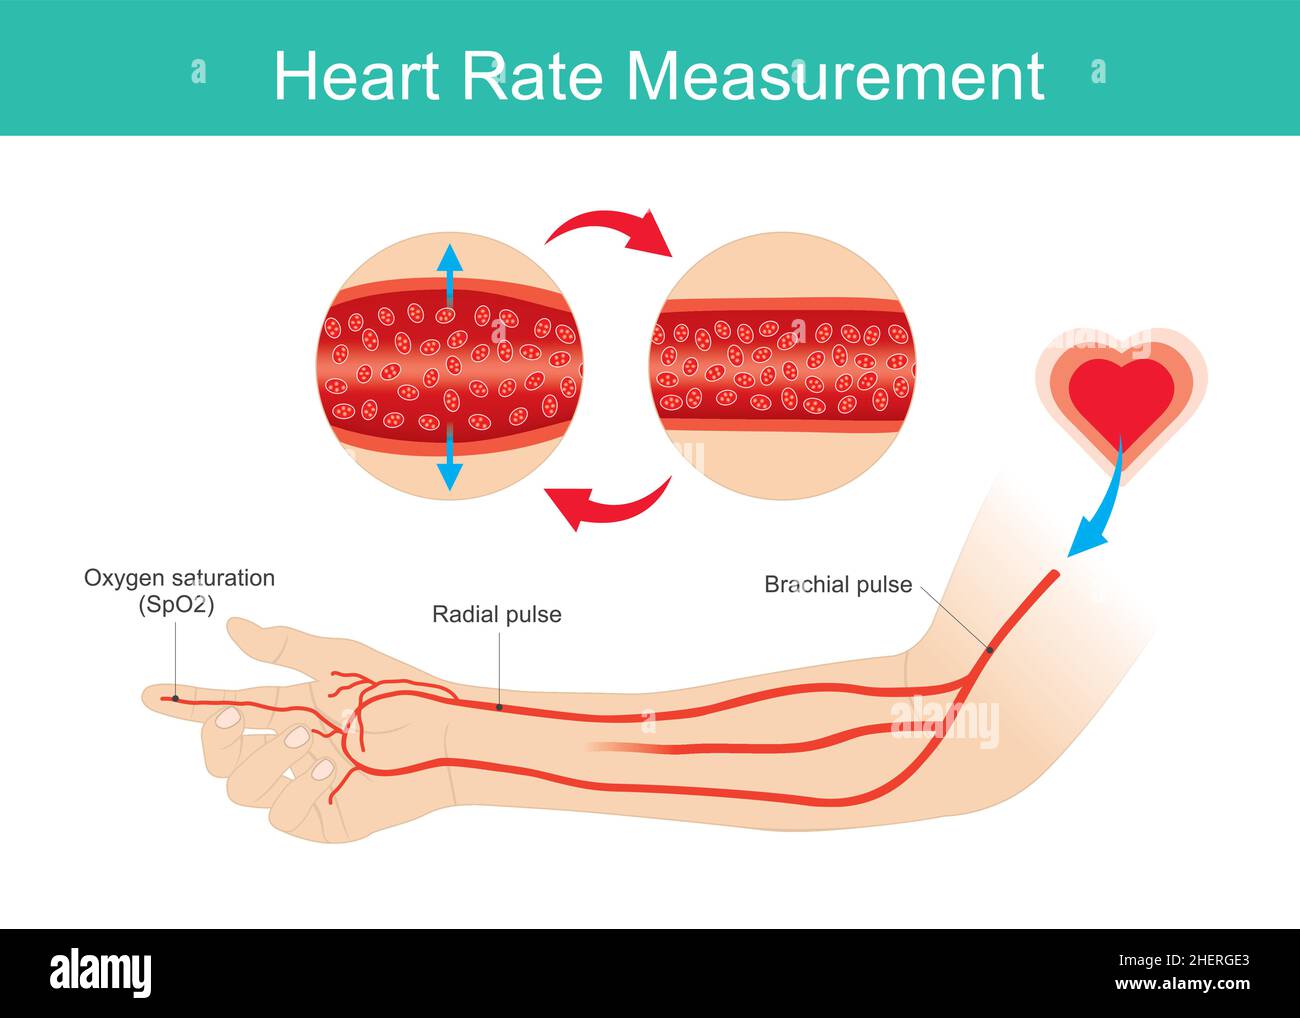 Heart Rate Measured. Arm and arteries illustration use for learning about heart rate and oxygen levels measured. Illustration. Stock Vector